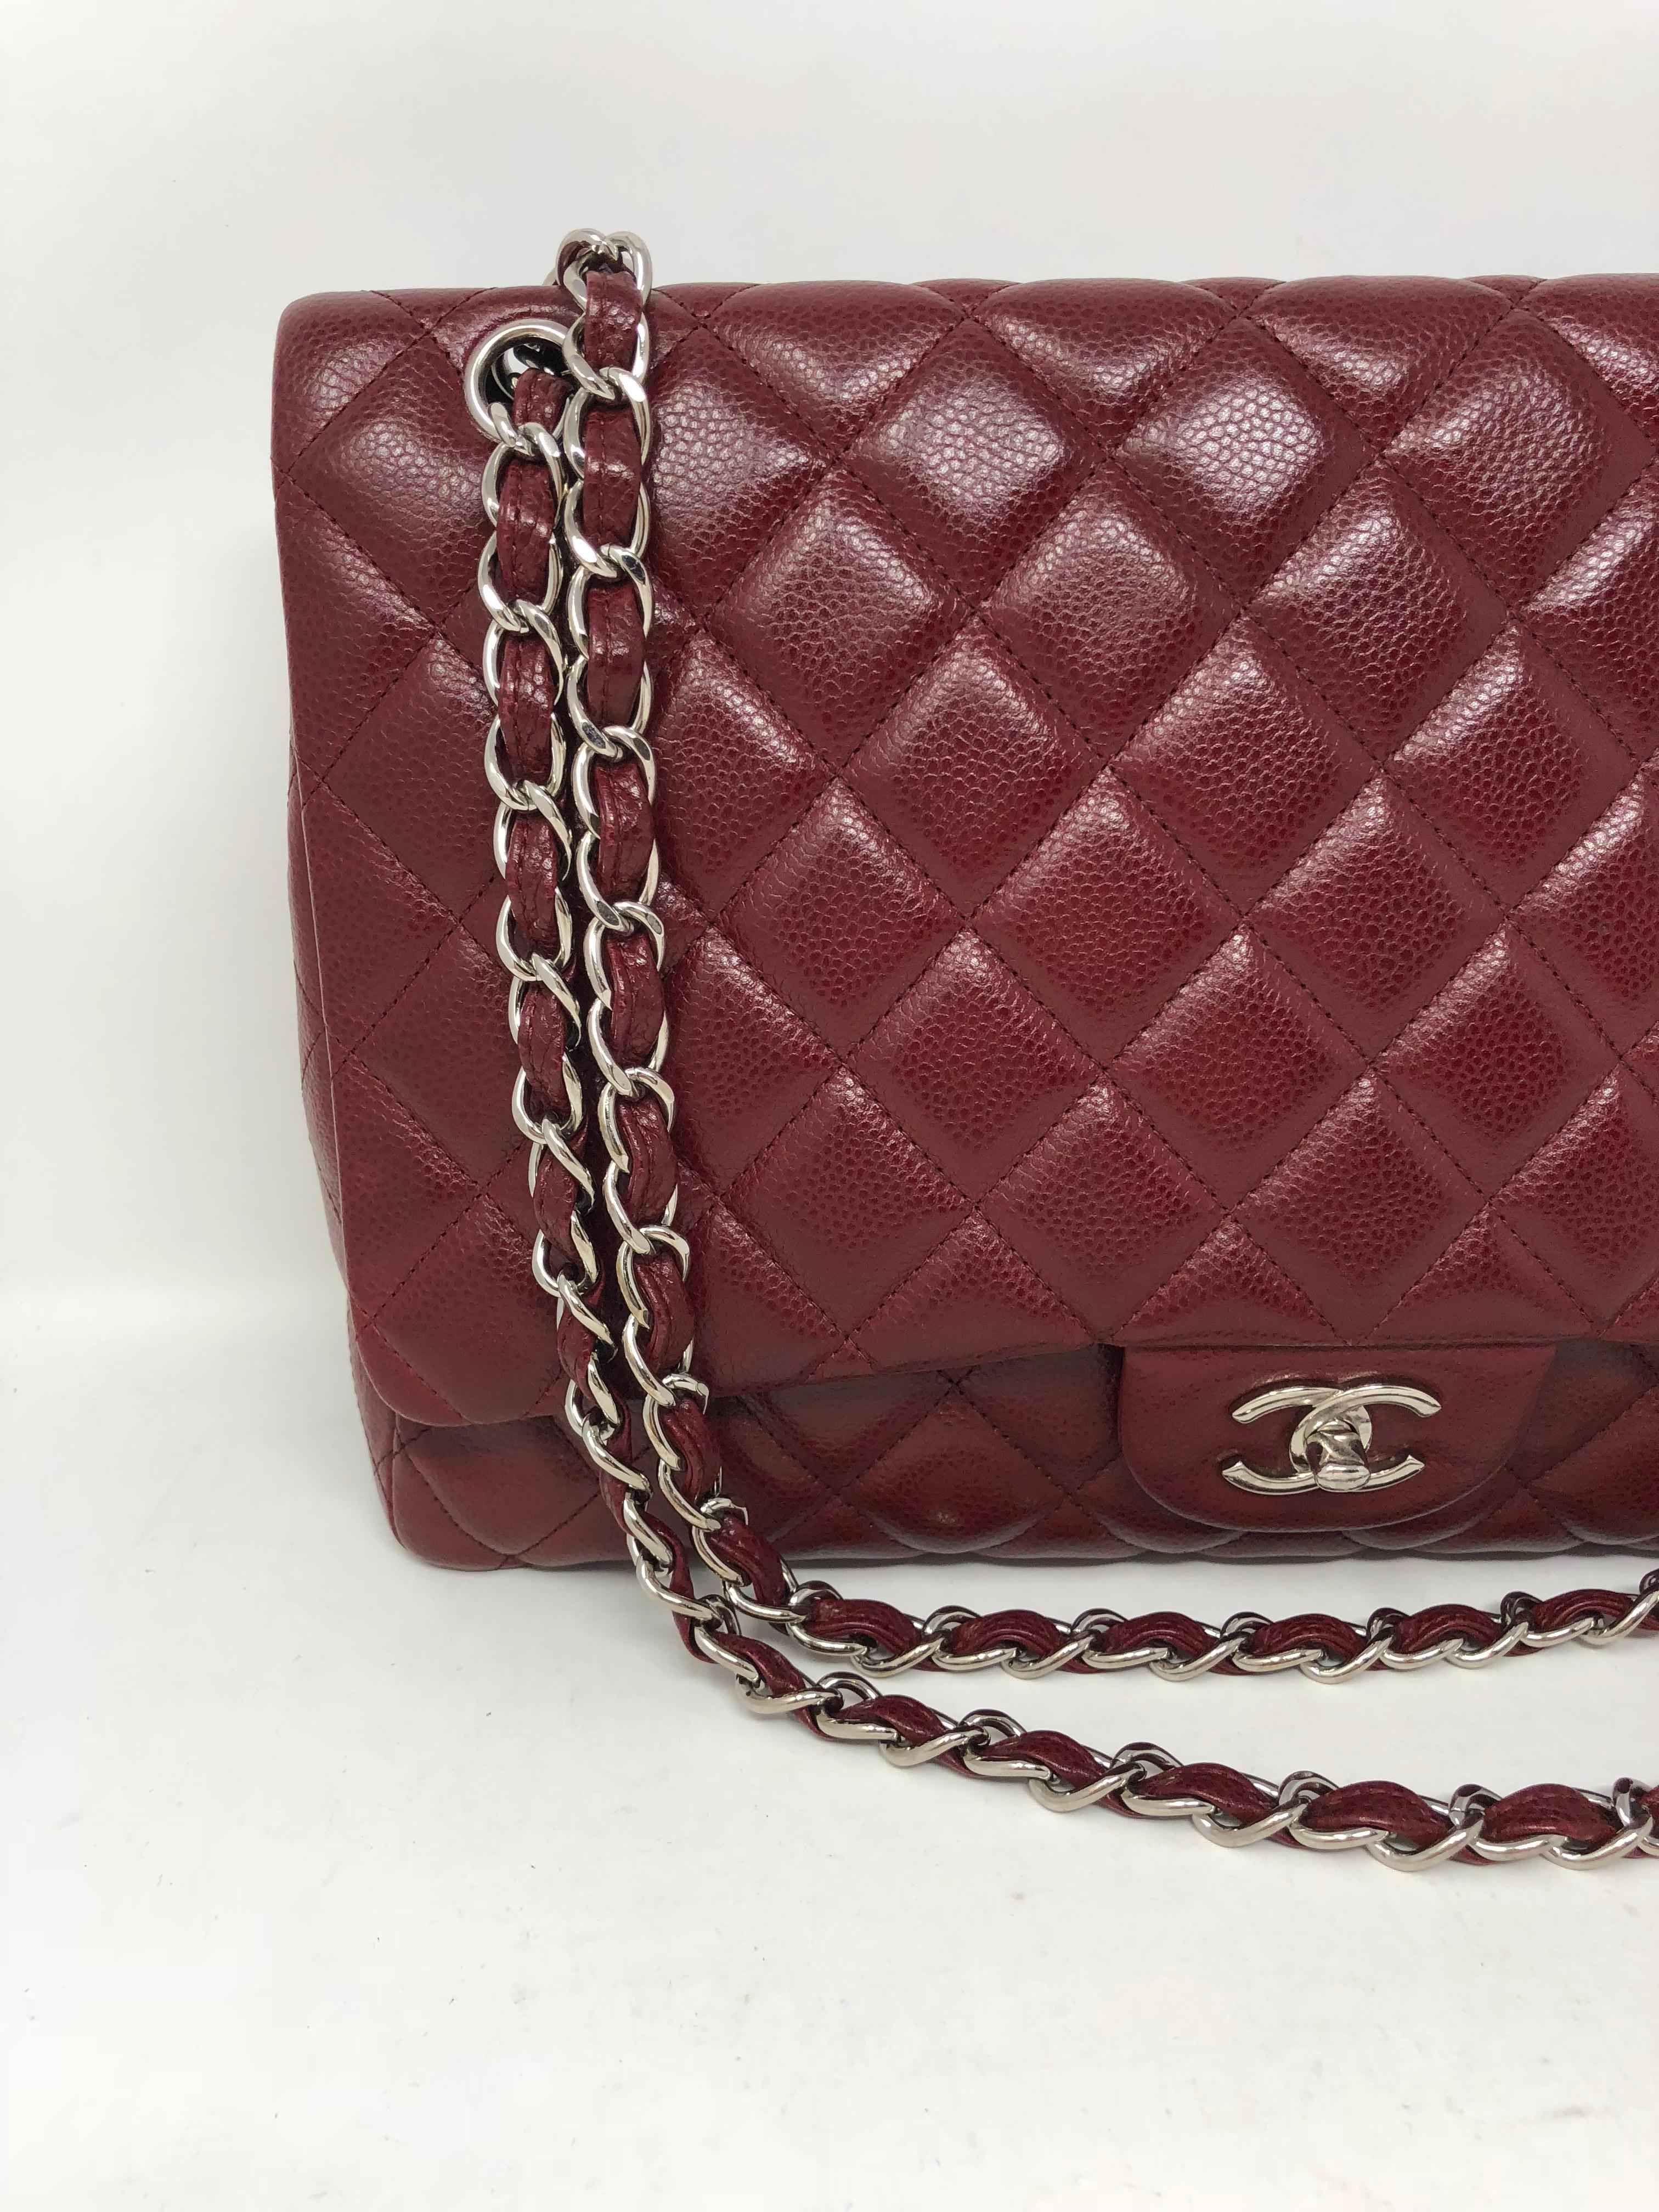 Chanel Burgundy Maxi Single Flap in Caviar Leather. Silver hardware can be worn crossbody or as a double strap bag. Good condition and deep burgundy color. Caviar leather is durable. Guaranteed authentic. Comes with authenticity card. 